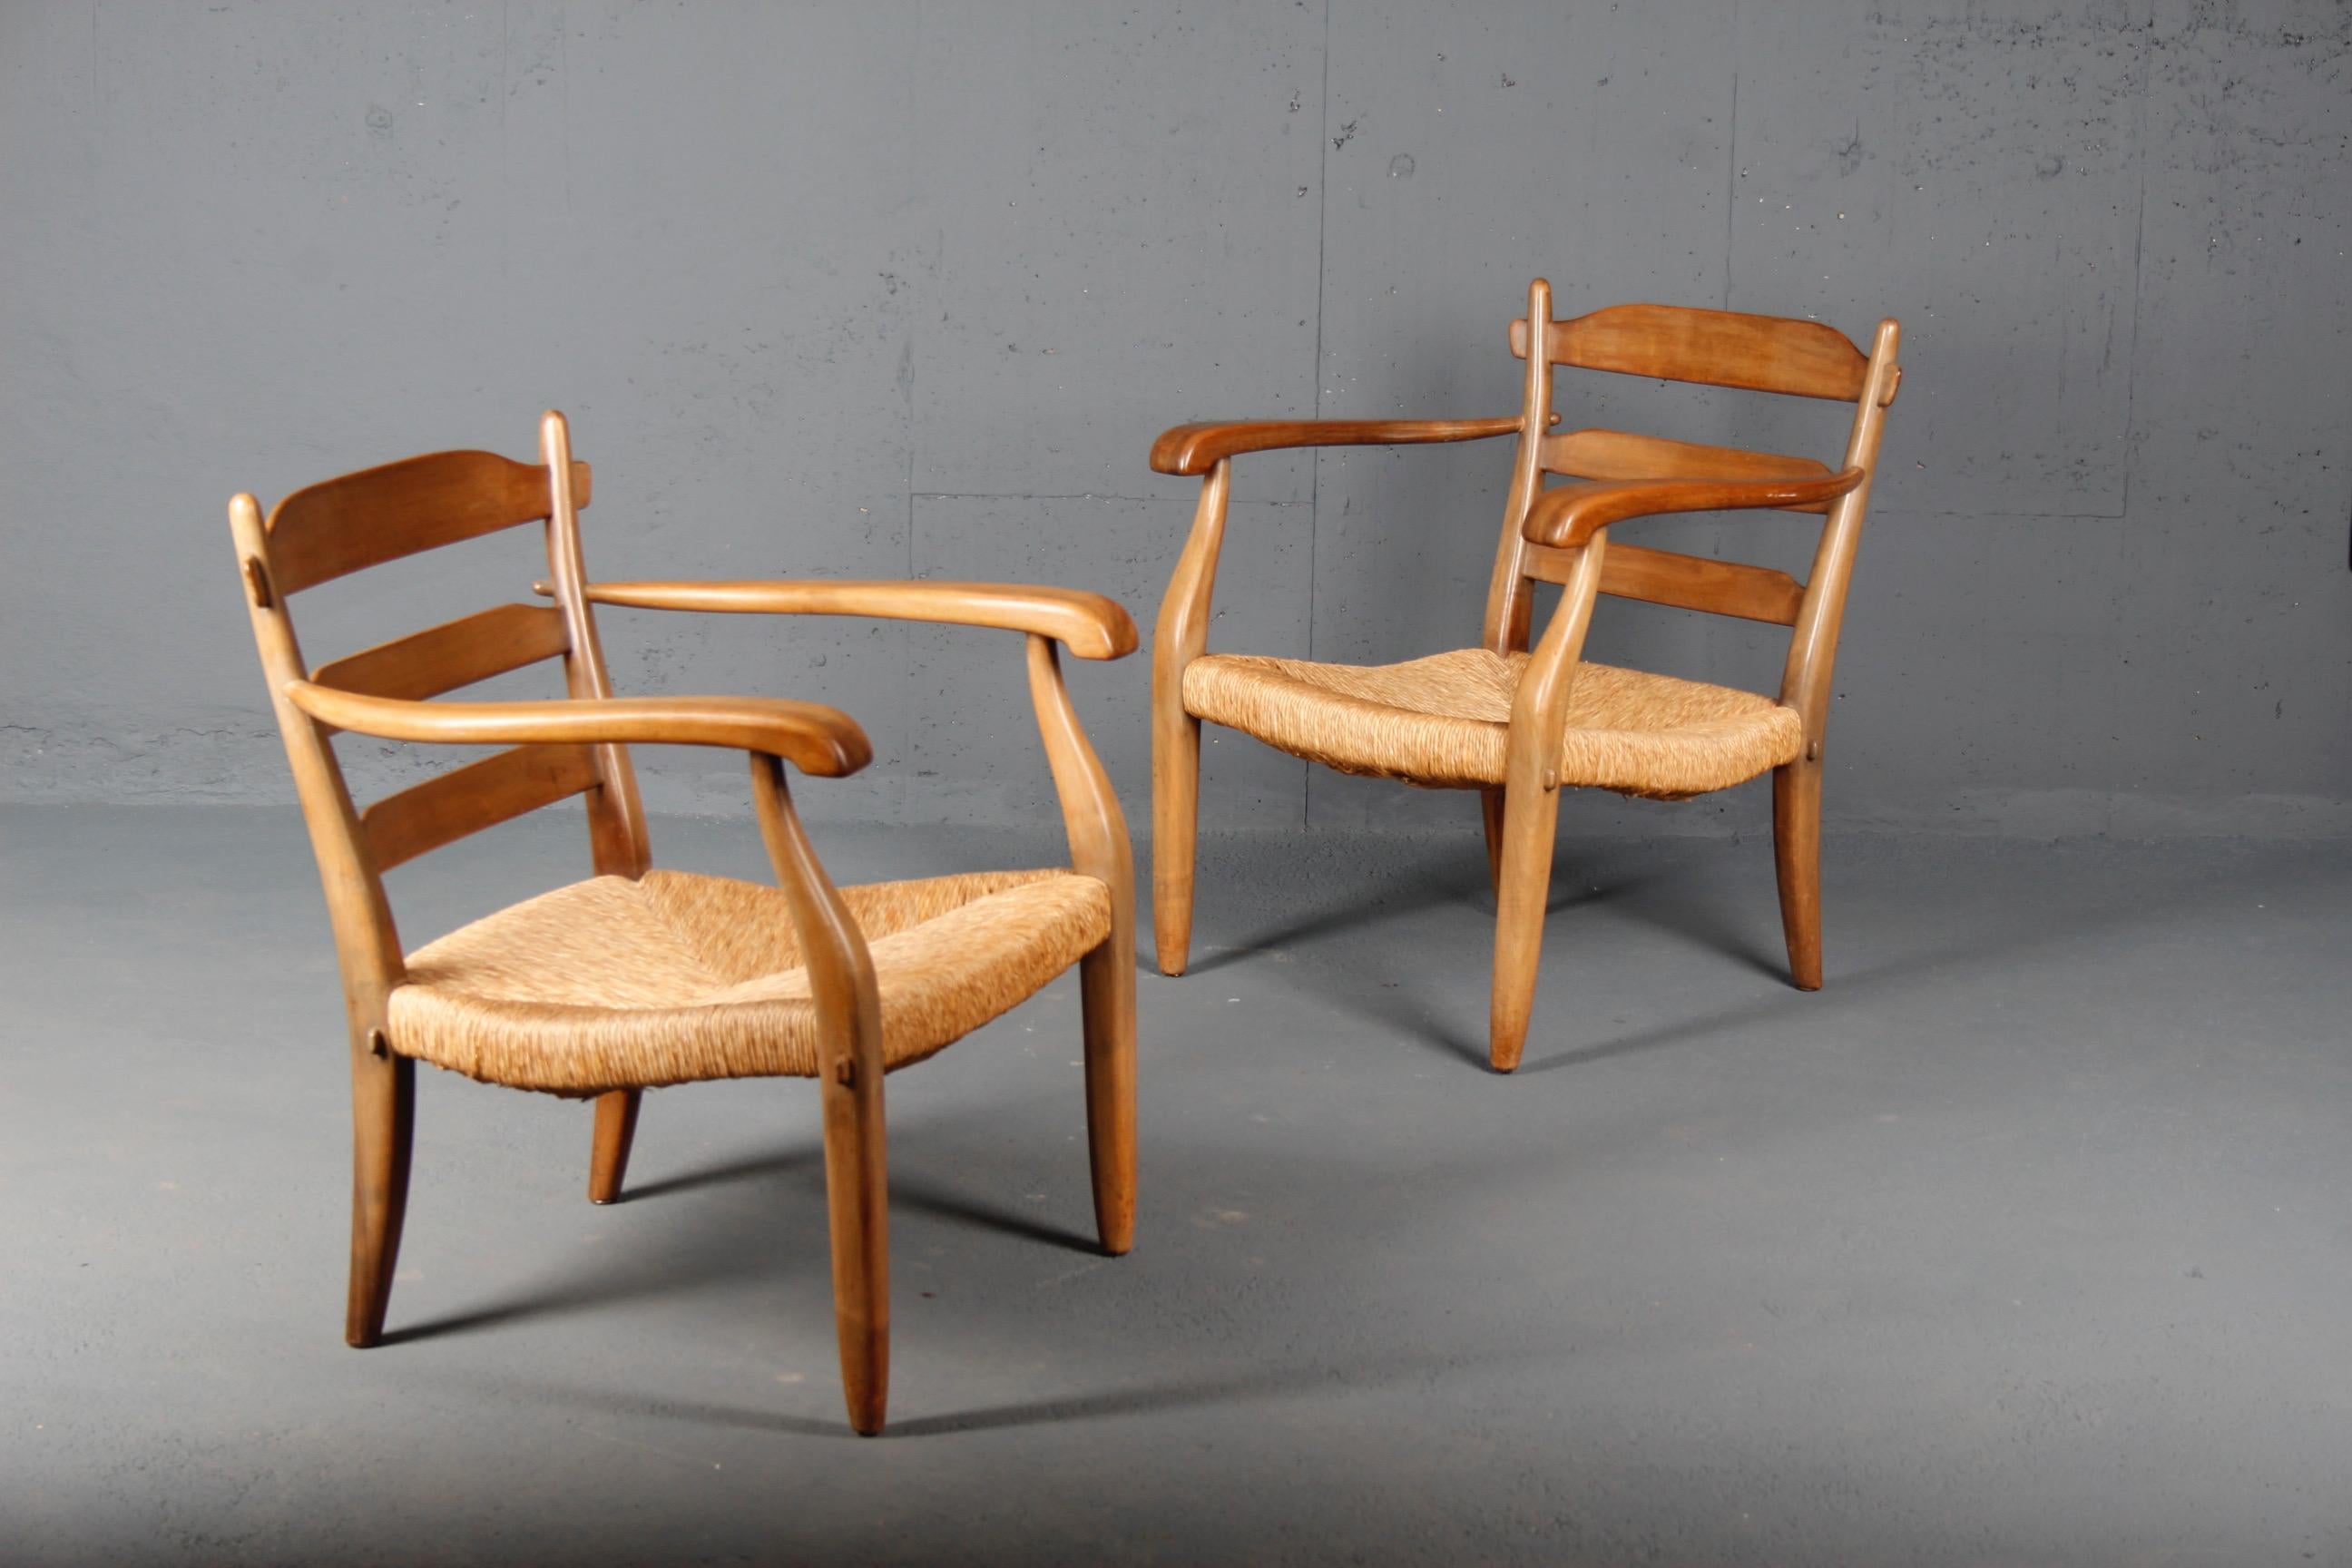 Pair of organic wood armchairs in the style of Franz Xavier Sproll.